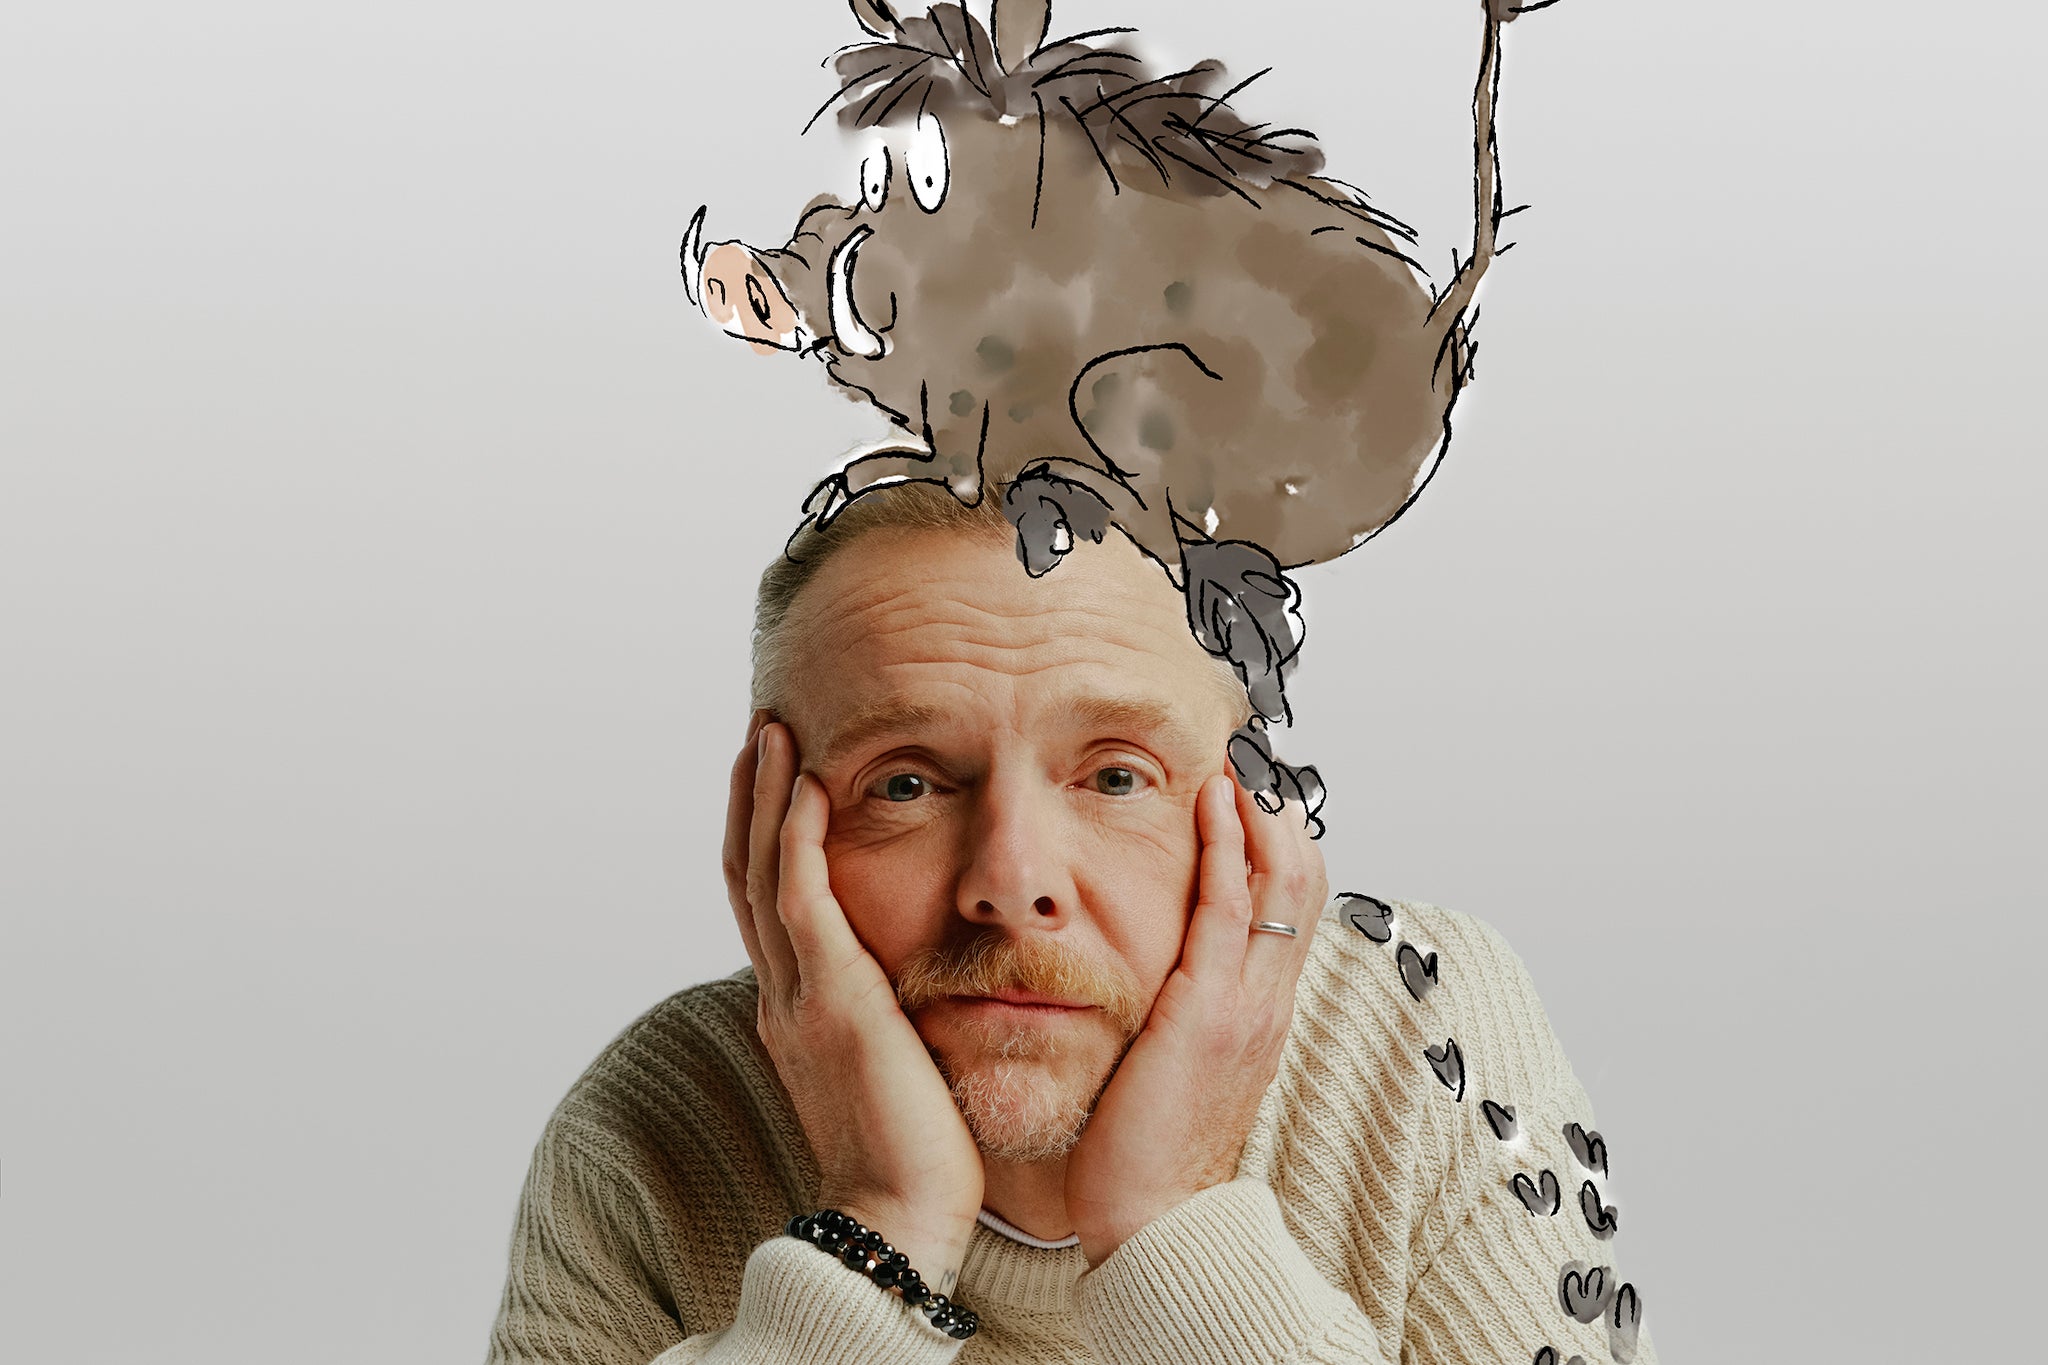 Simon Pegg lends his voice to the whimsical animations of Quentin Blake’s much-loved children’s stories